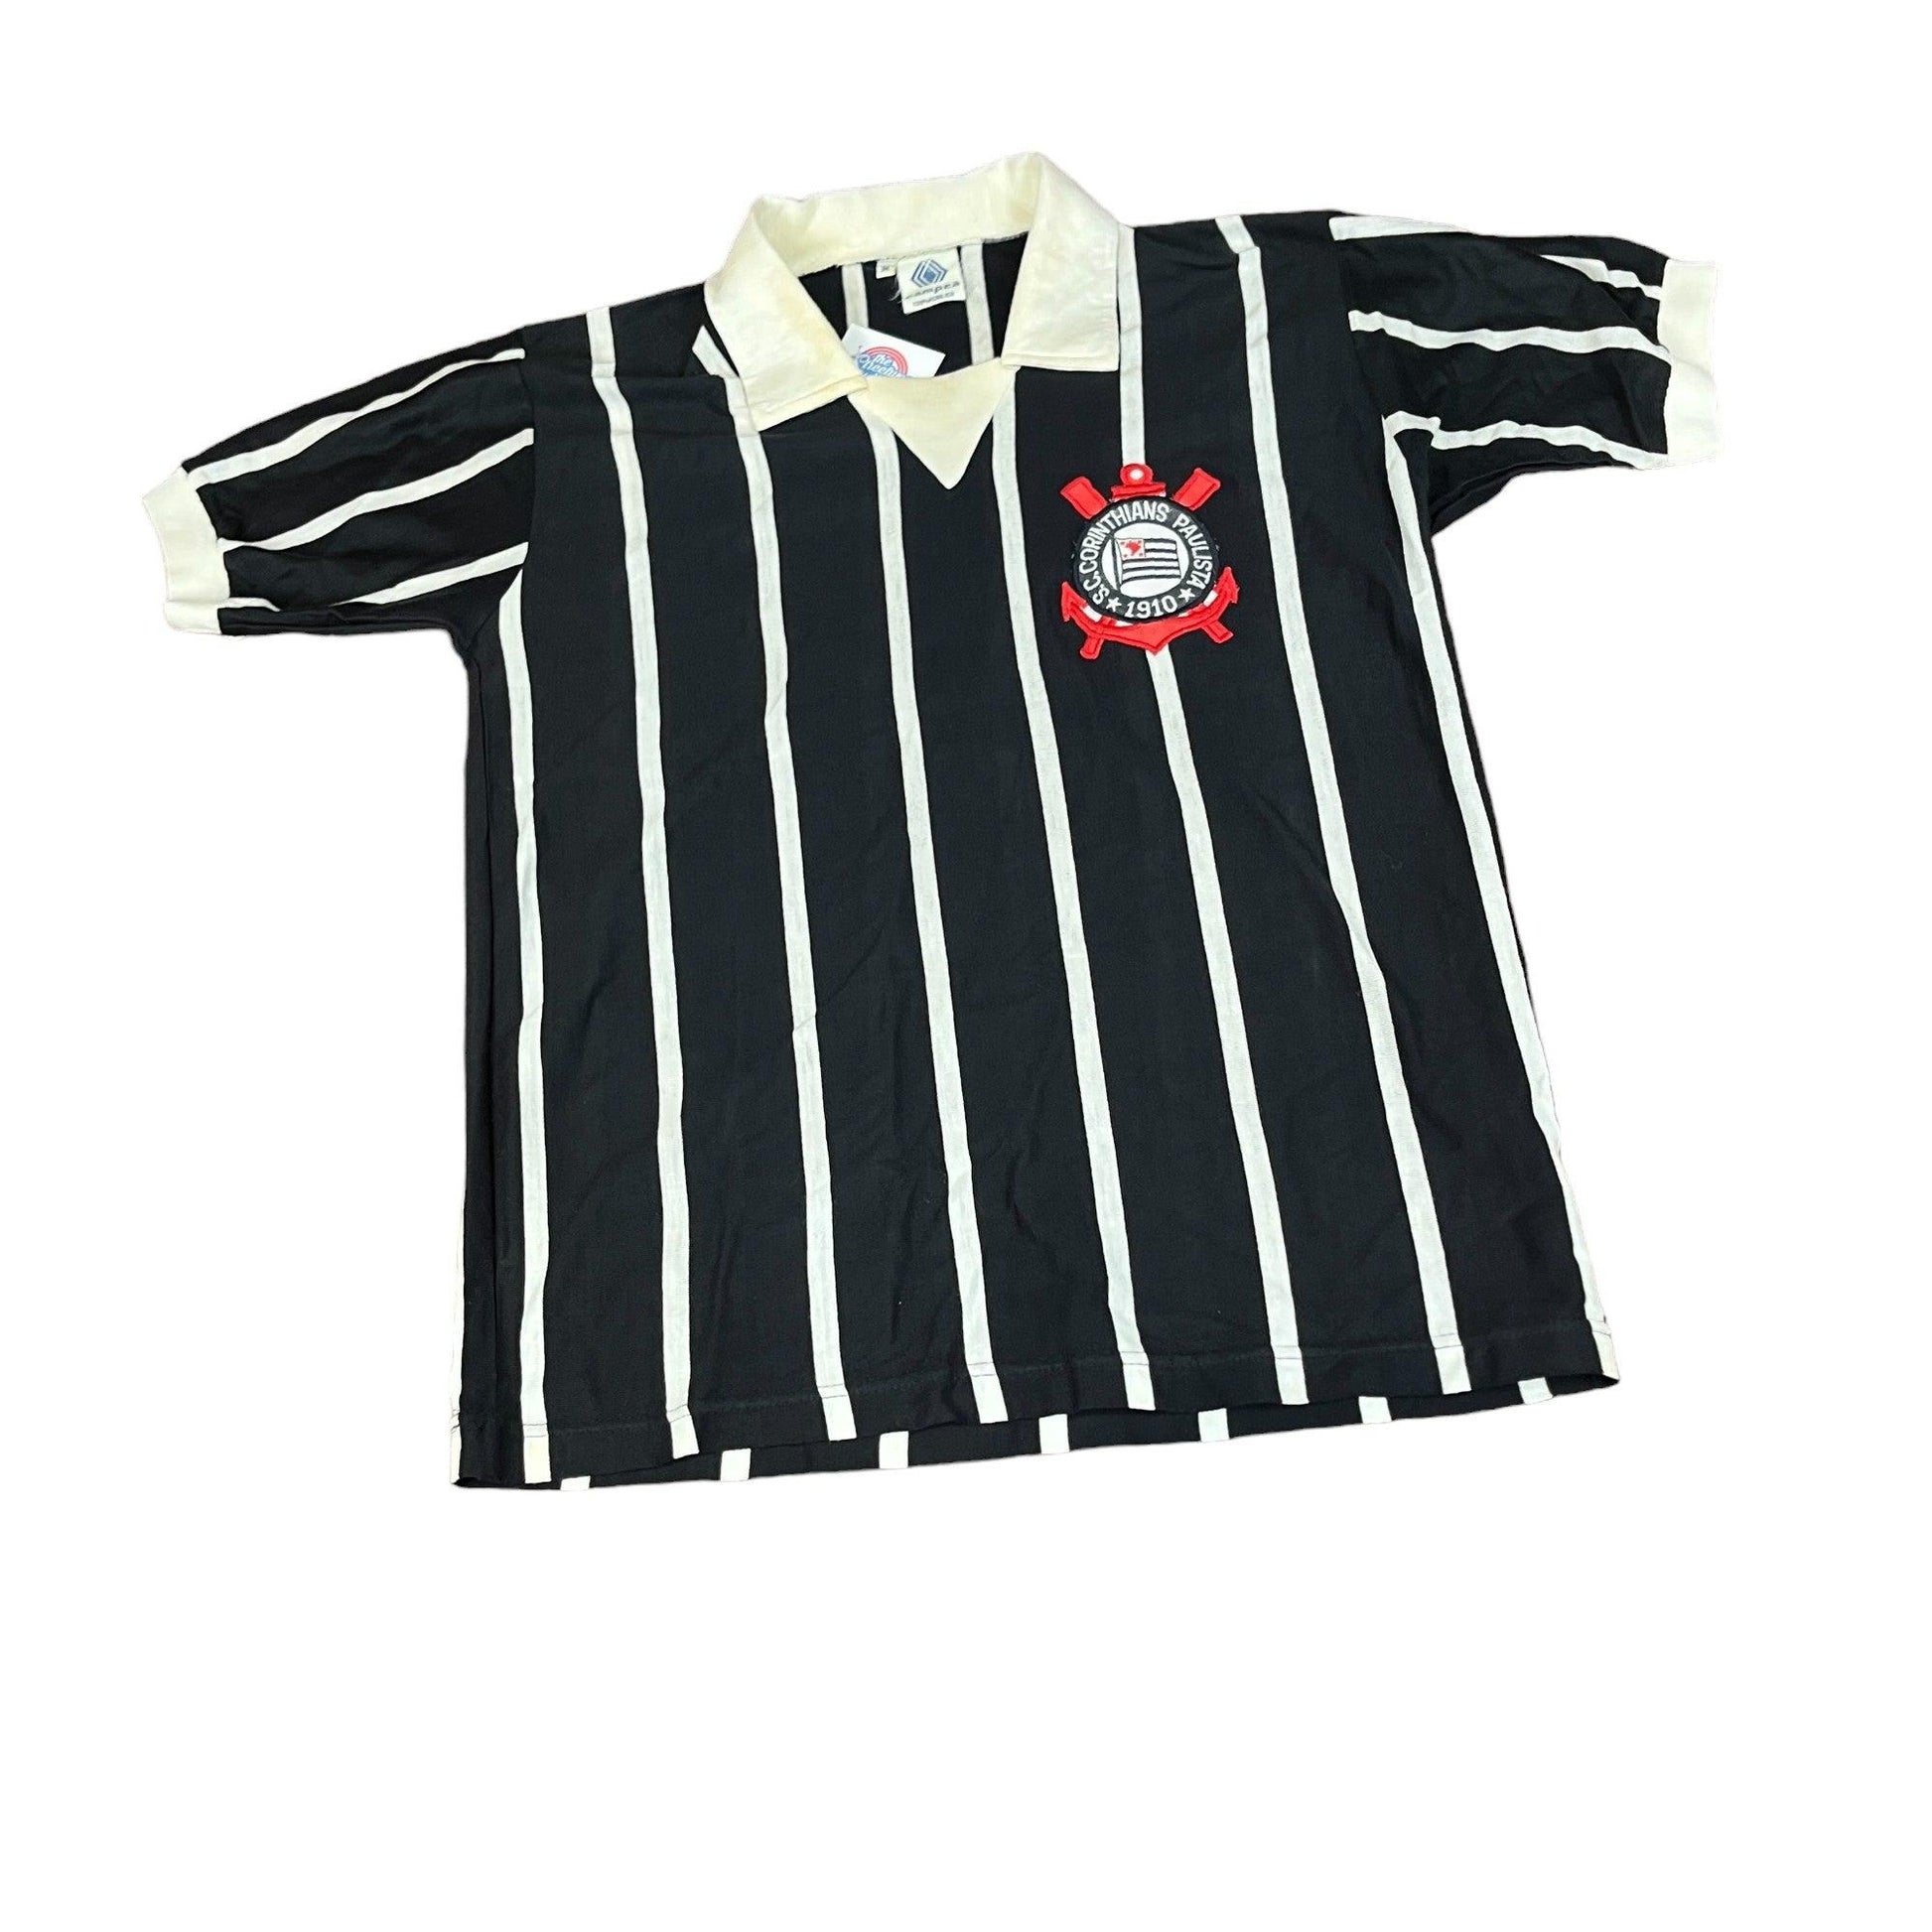 Vintage Black + White Corinthians Tee - Recommended Size - Small - The Streetwear Studio